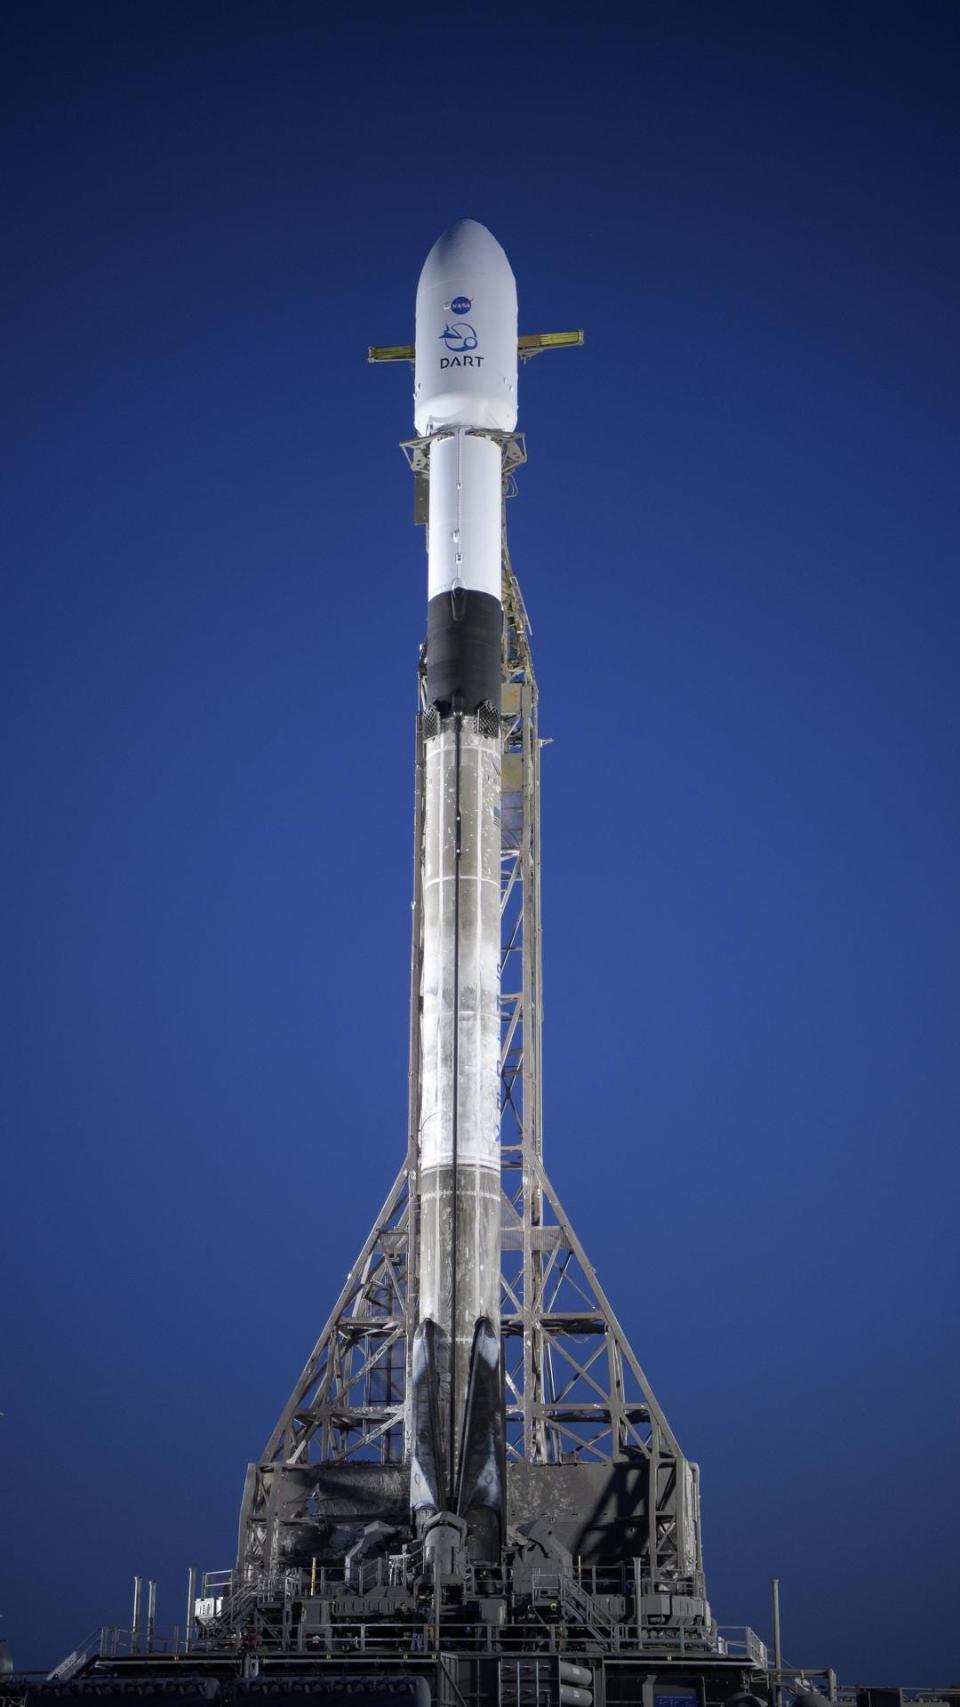 The SpaceX Falcon 9 rocket with the Double Asteroid Redirection Test, or DART, spacecraft onboard, is seen at Space Launch Complex 4E, Vandenberg Space Force Base in California. DART is the world’s first full-scale planetary defense test, demonstrating one method of asteroid deflection technology. The mission was built and is managed by the Johns Hopkins APL for NASA’s Planetary Defense Coordination Office.